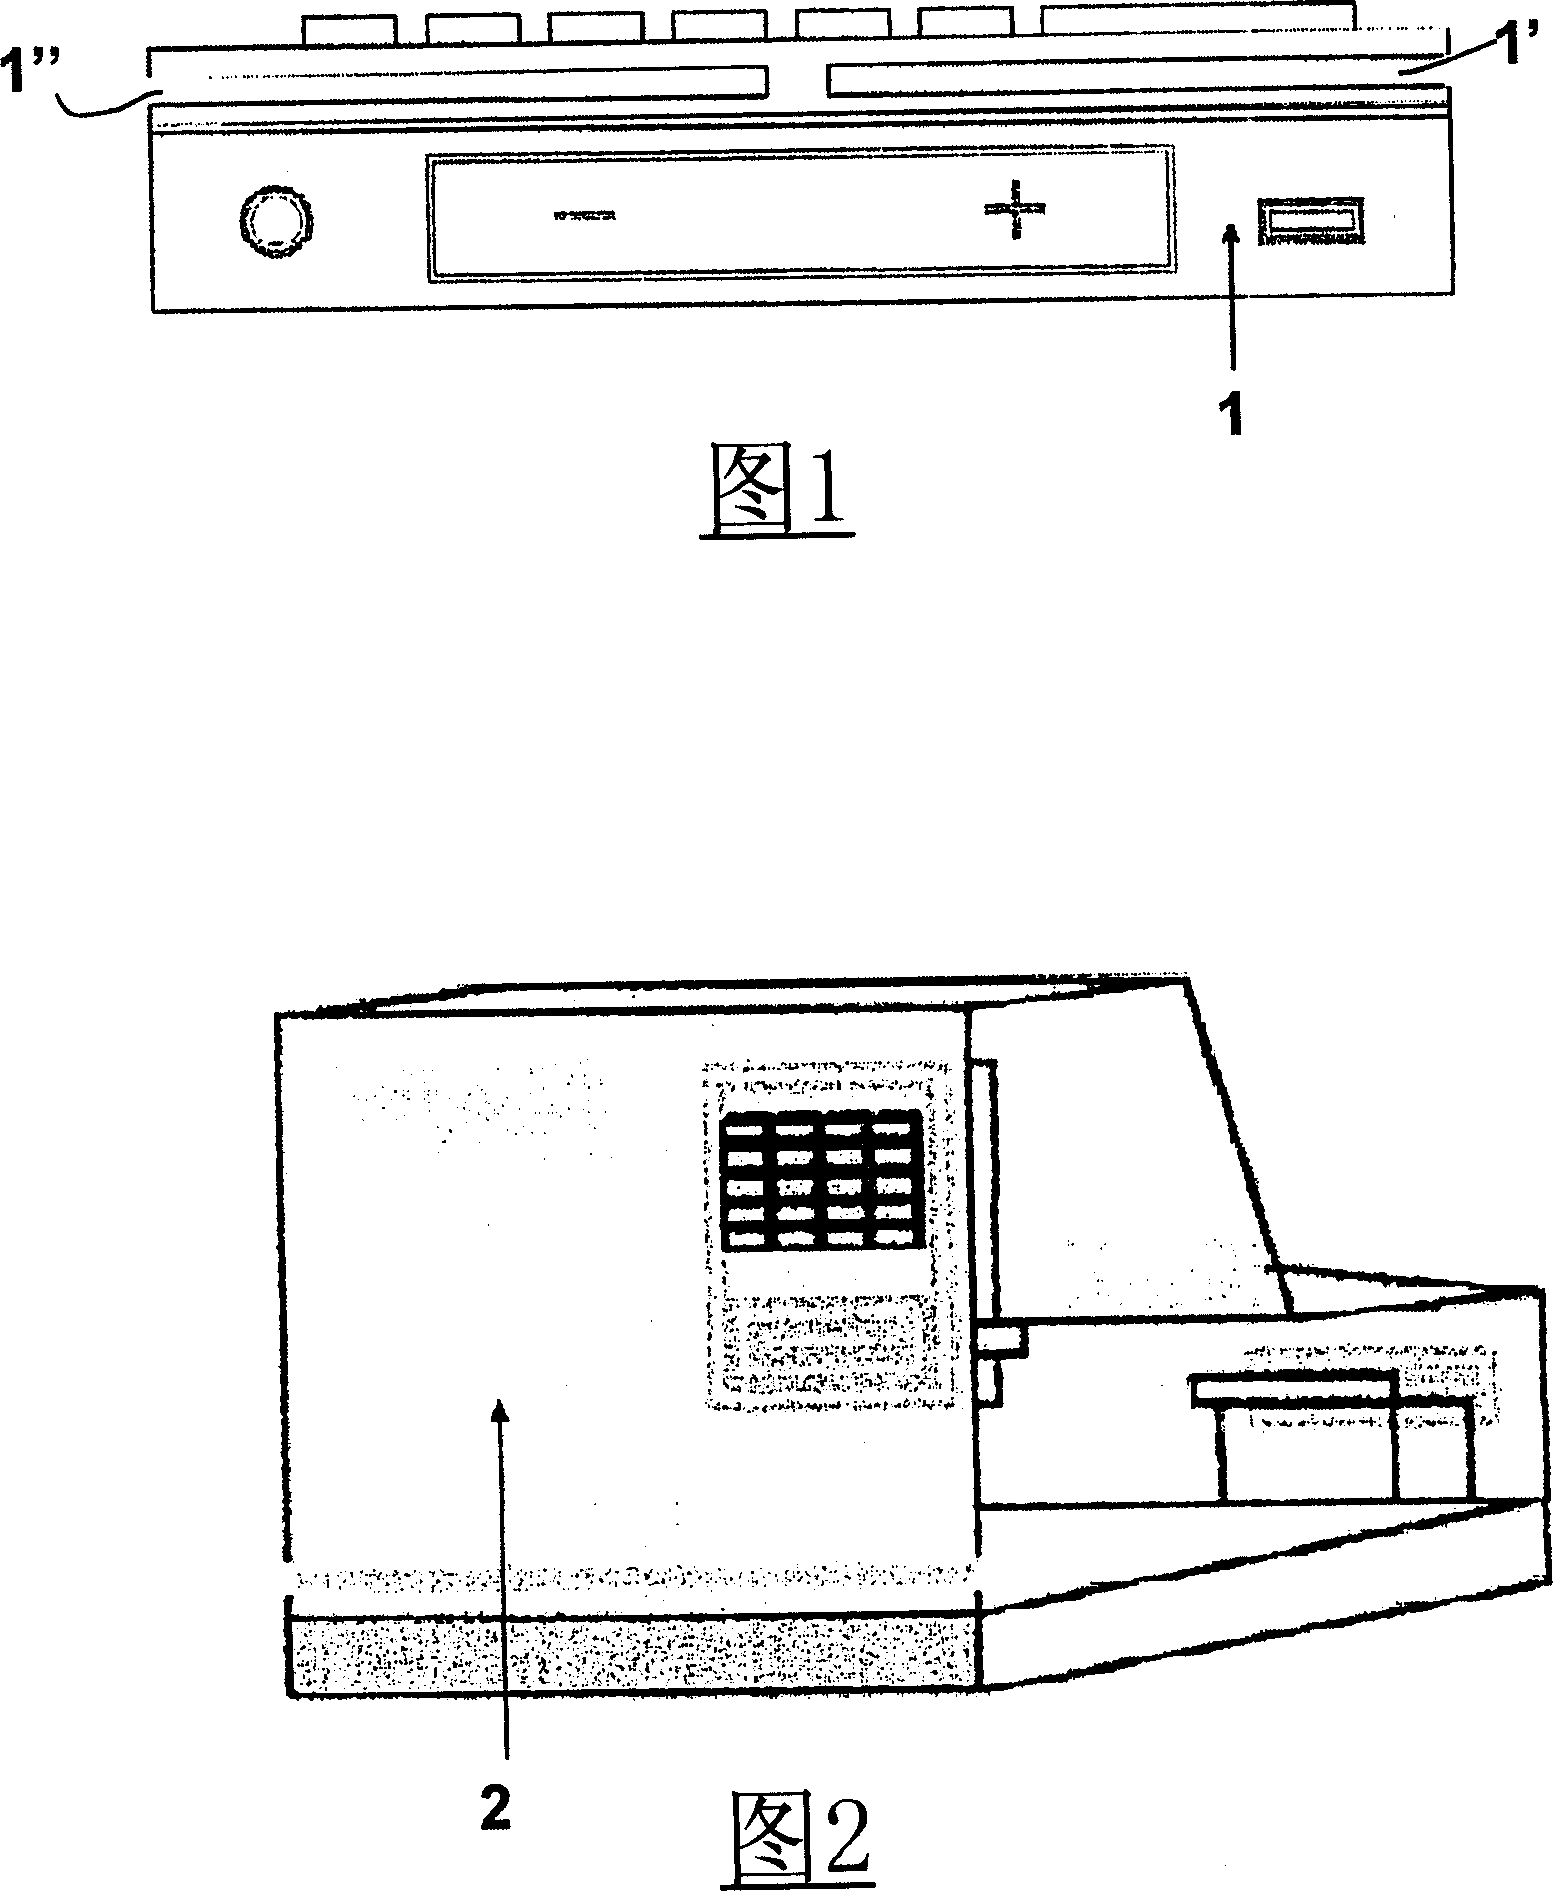 Method and system for managing self-determination off-line financial trading